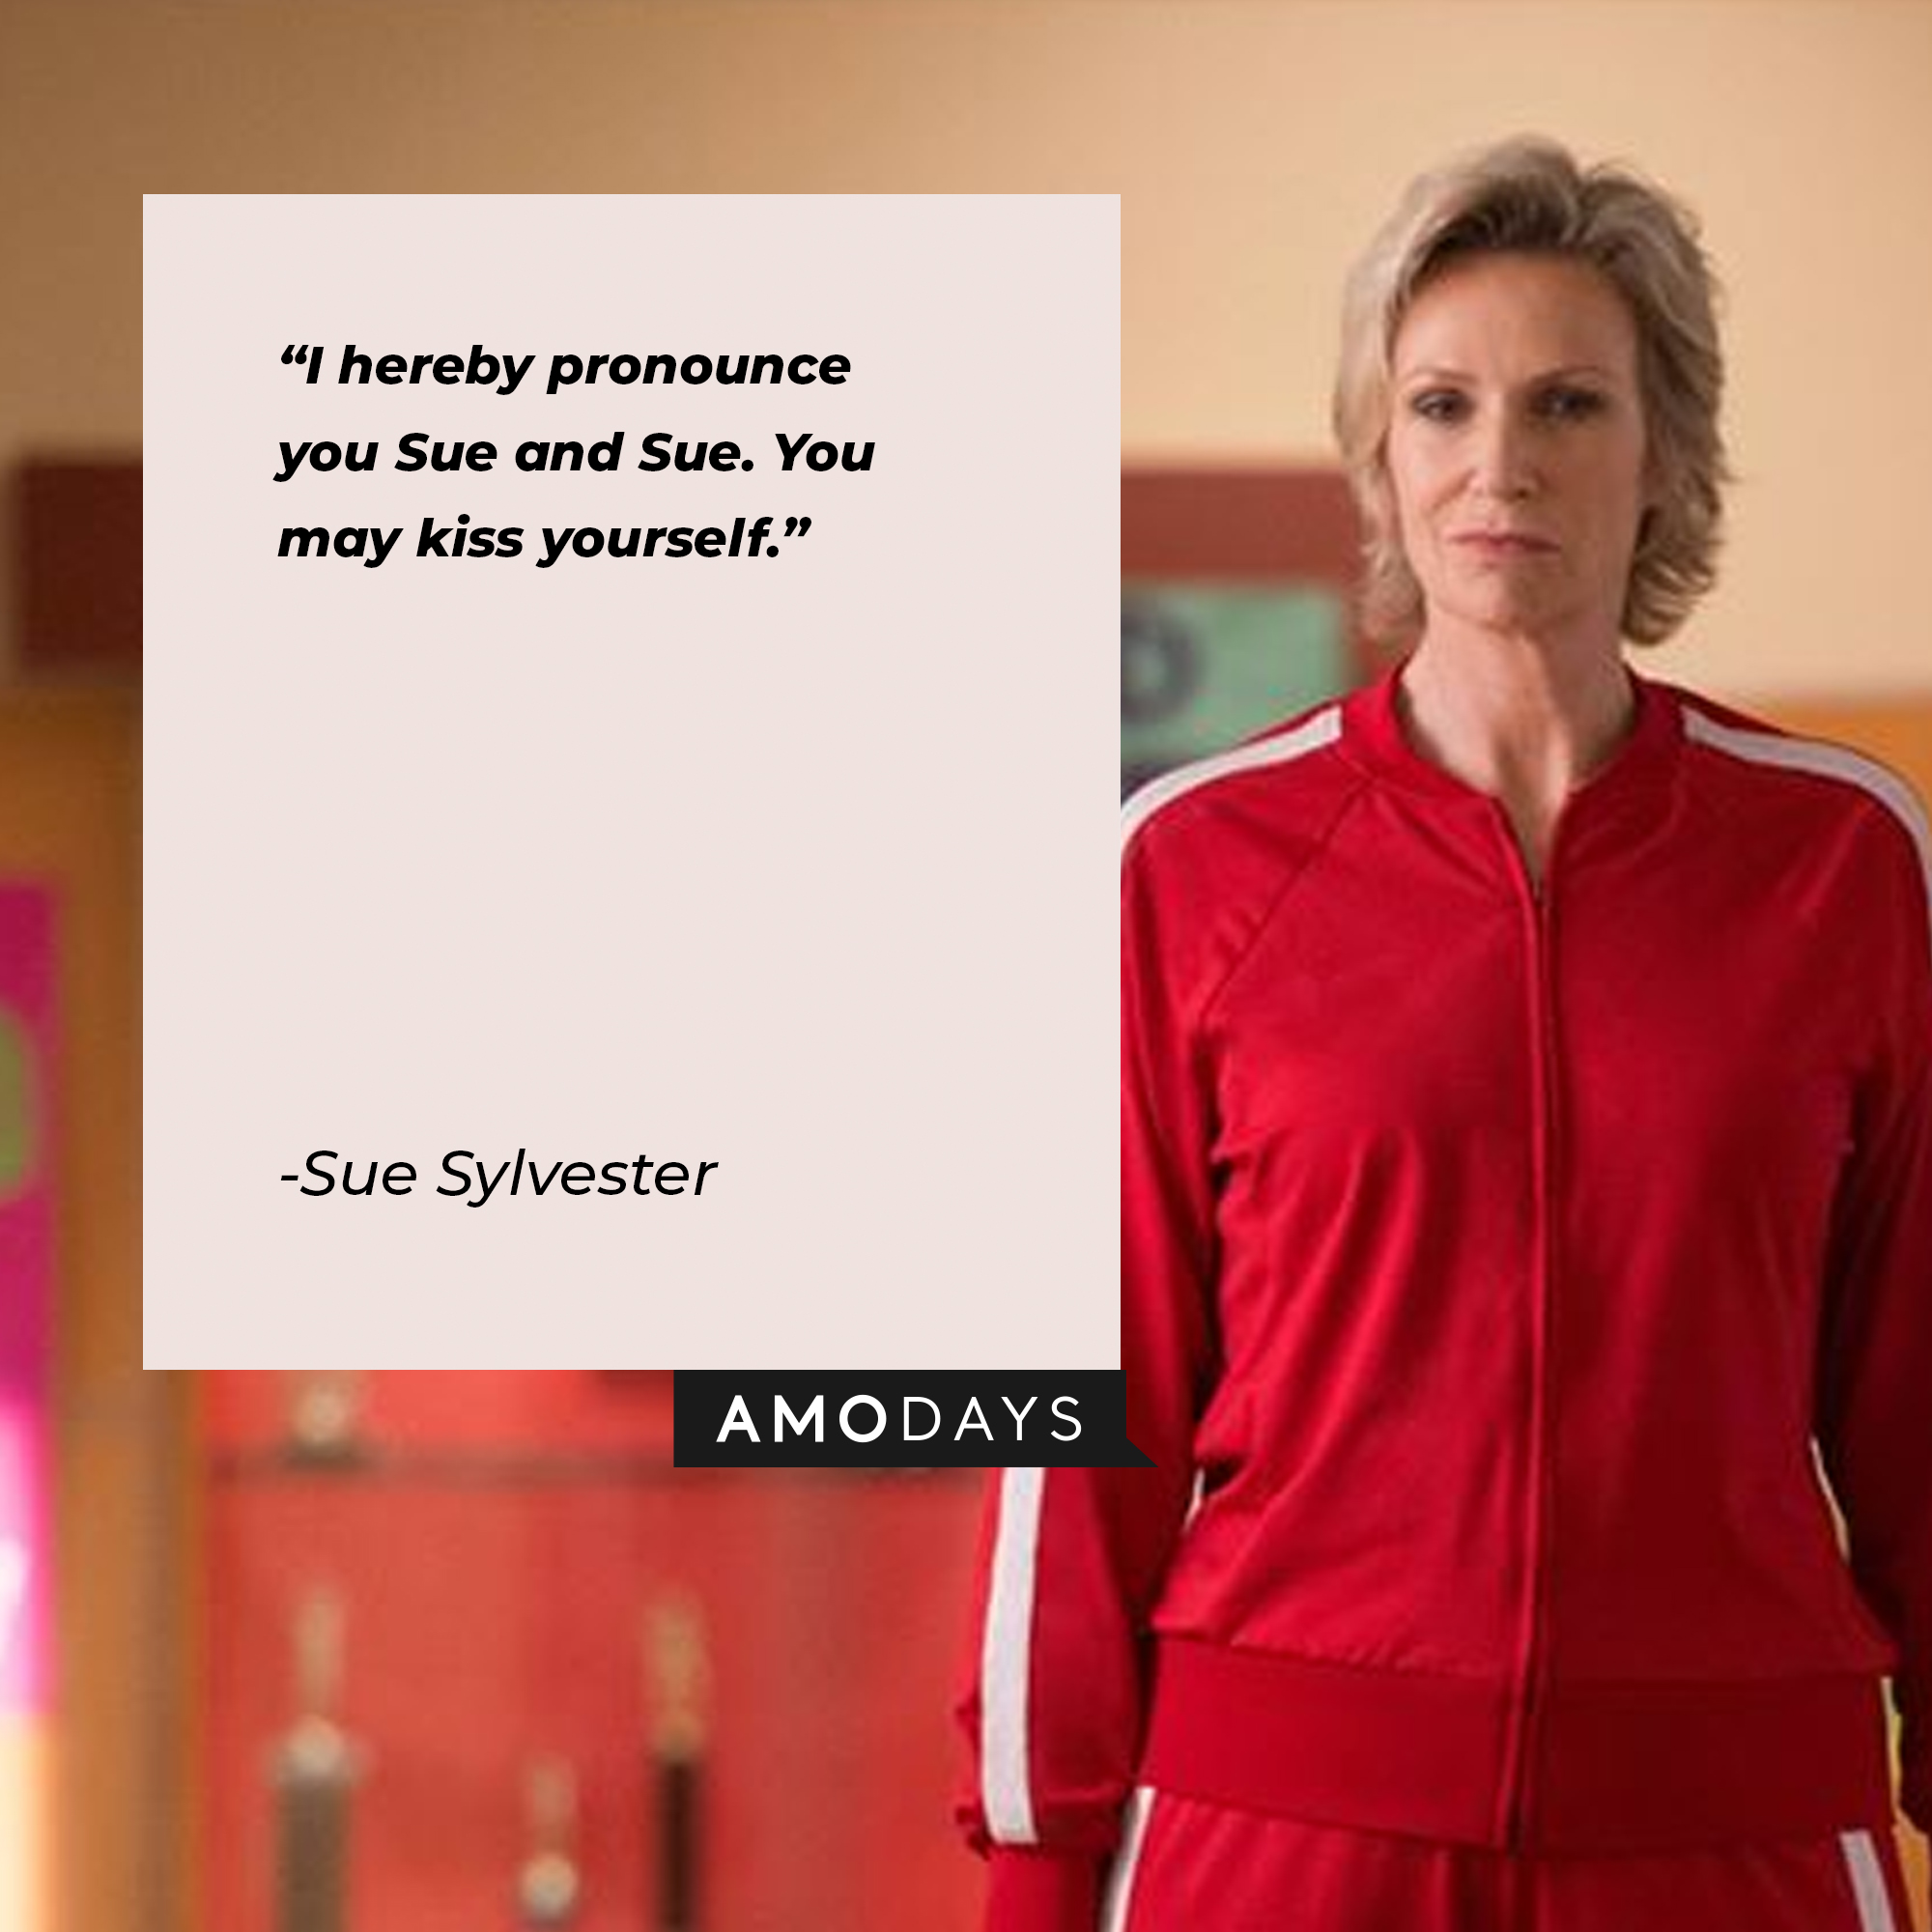 A picture of Sue Sylester with a quote by her : “I hereby pronounce you Sue and Sue. You may kiss yourself.” | Source: facebook.com/Glee